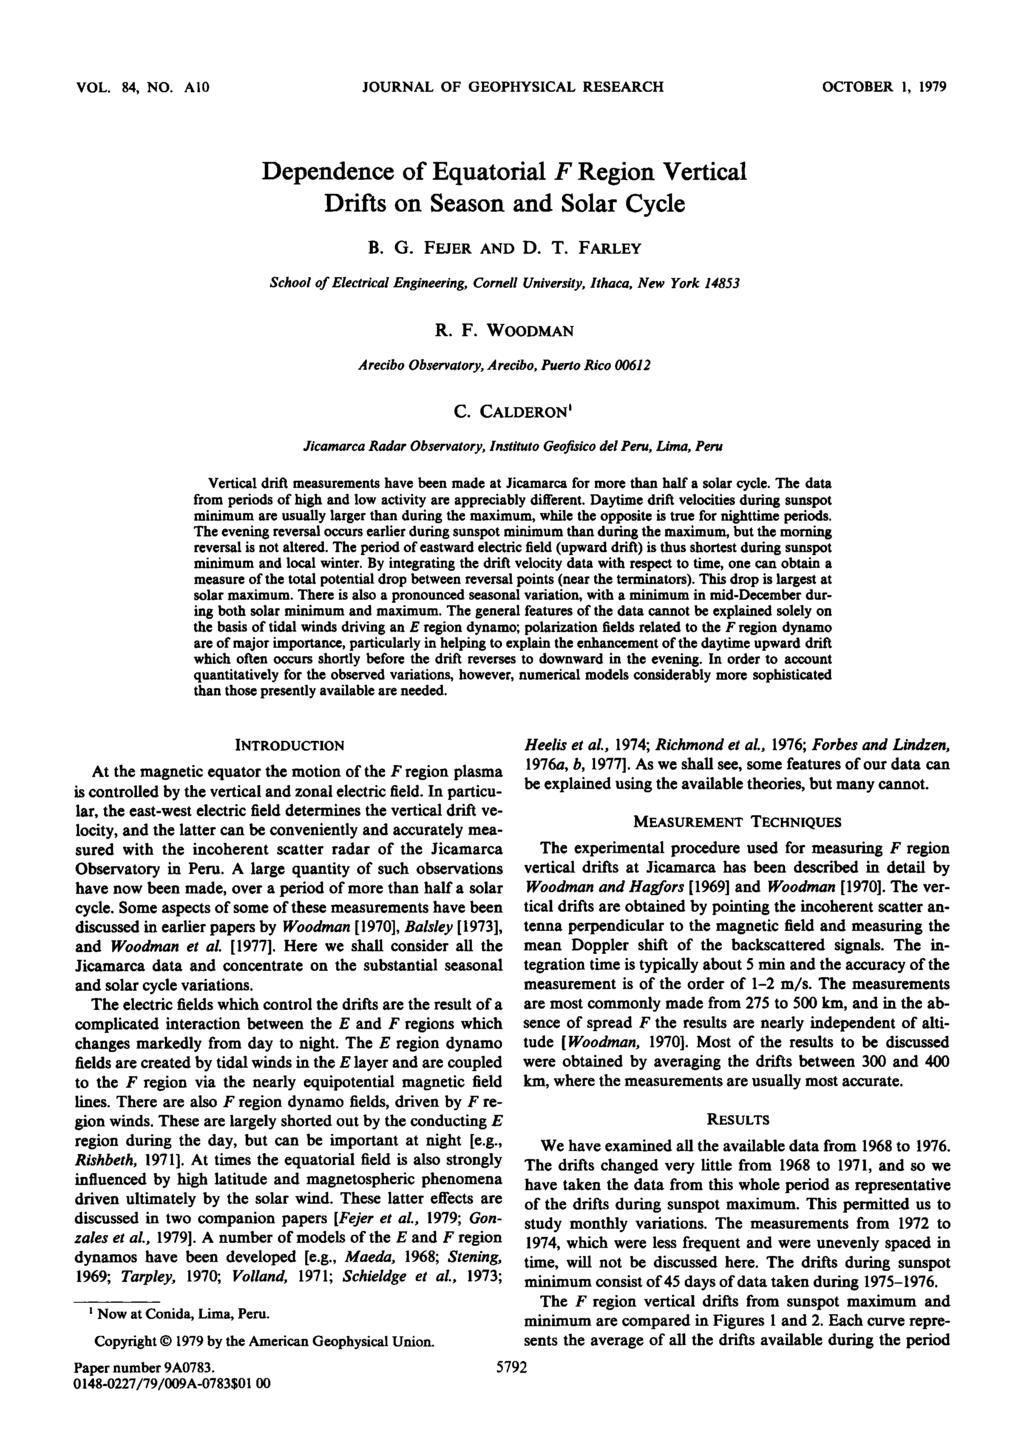 VOL. 84, NO. AI0 JOURNAL OF GEOPHYSICAL RESEARCH OCTOBER 1, 1979 Dependence of Equatorial F Region Vertical Drifts on Season and Solar Cycle B. G. FEJER AND D. T.